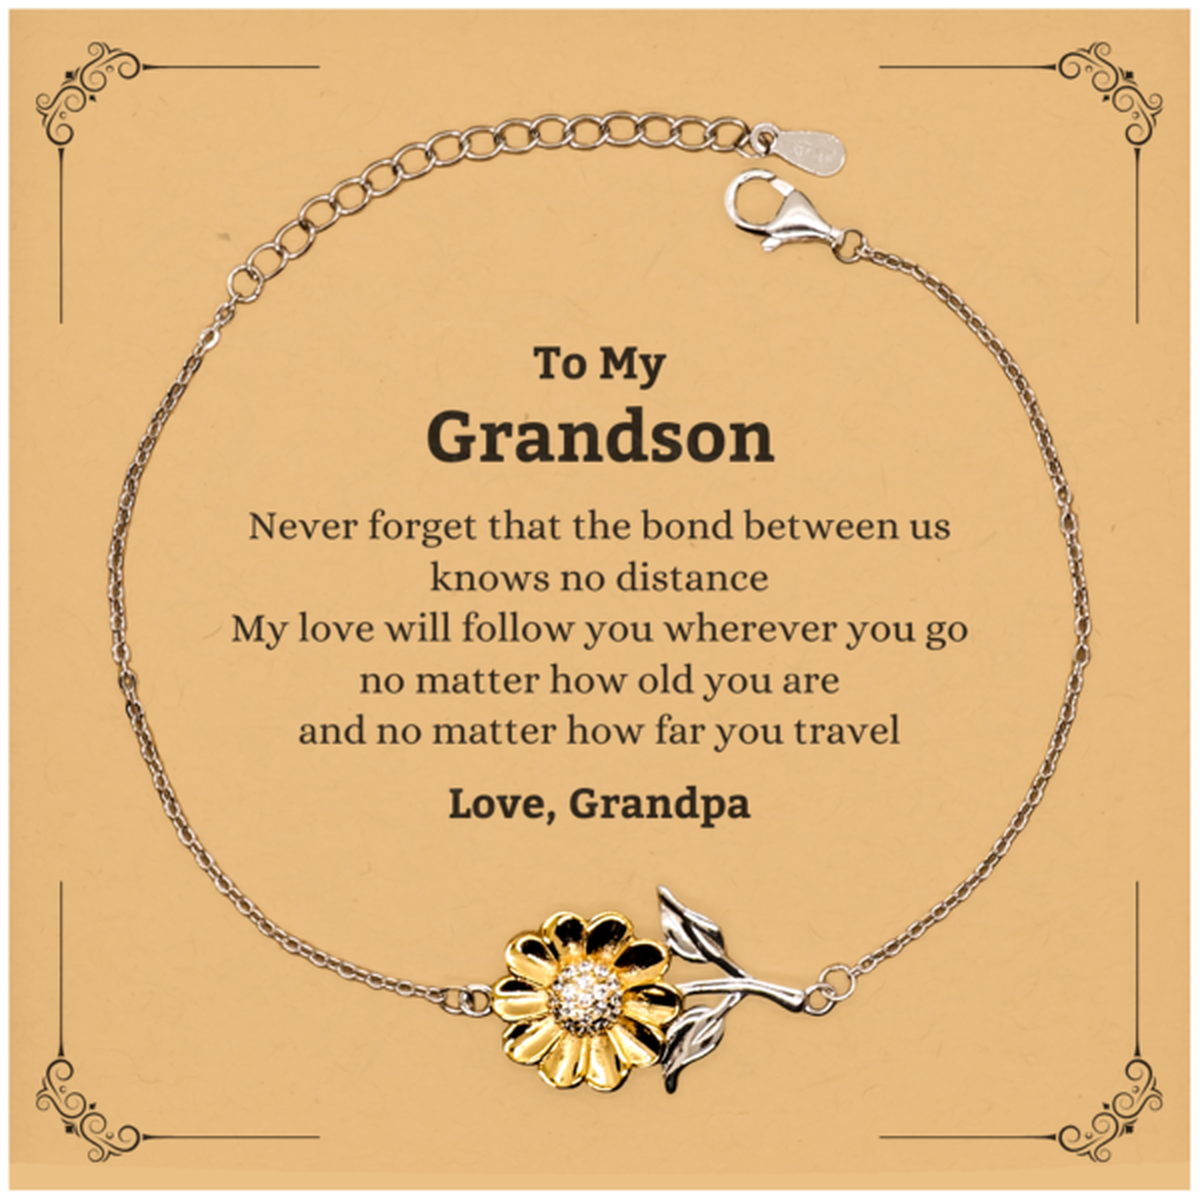 Grandson Birthday Gifts from Grandpa, Adjustable Sunflower Bracelet for Grandson Christmas Graduation Unique Gifts Grandson Never forget that the bond between us knows no distance. Love, Grandpa